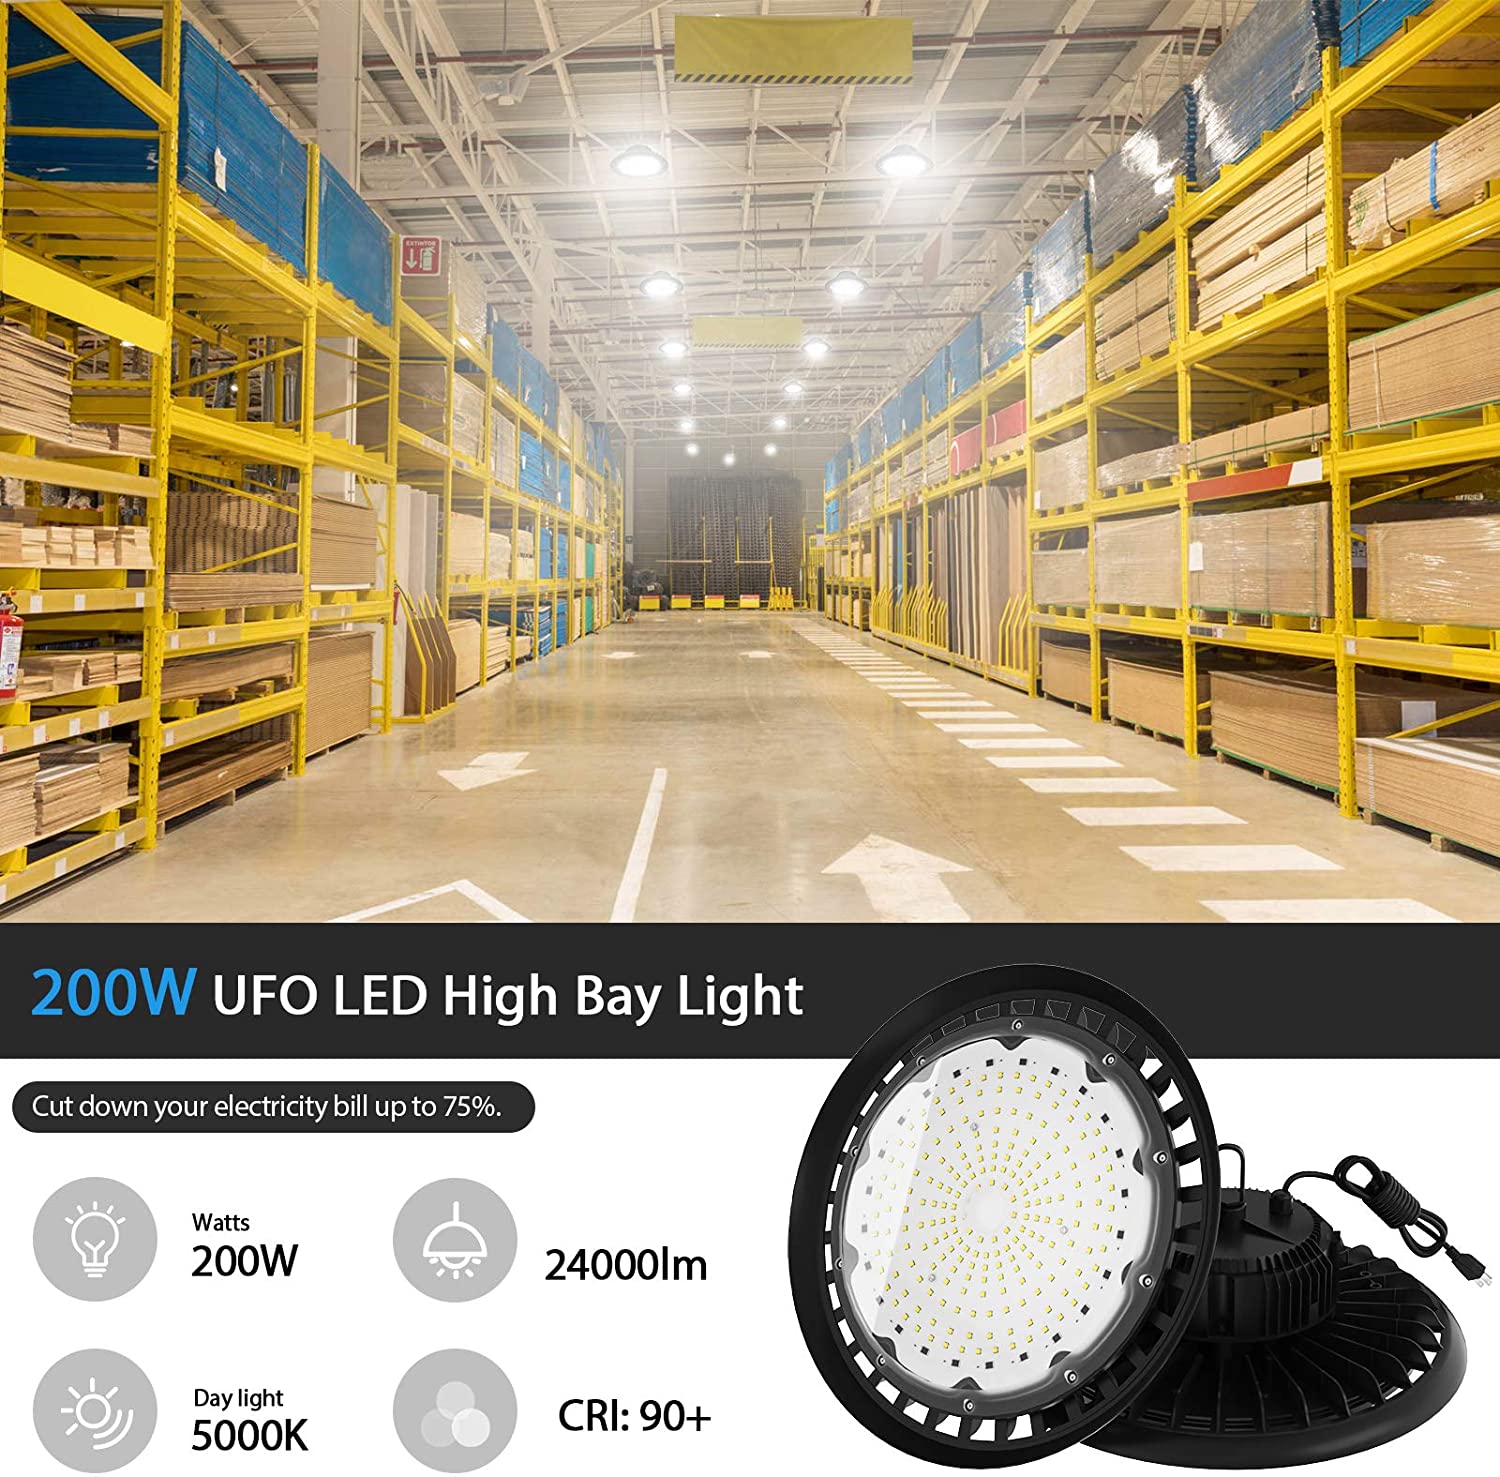 800W HPS/HID Equiv. 200W LED Dimmable UFO High Bay Light Warehouse Shop Light 